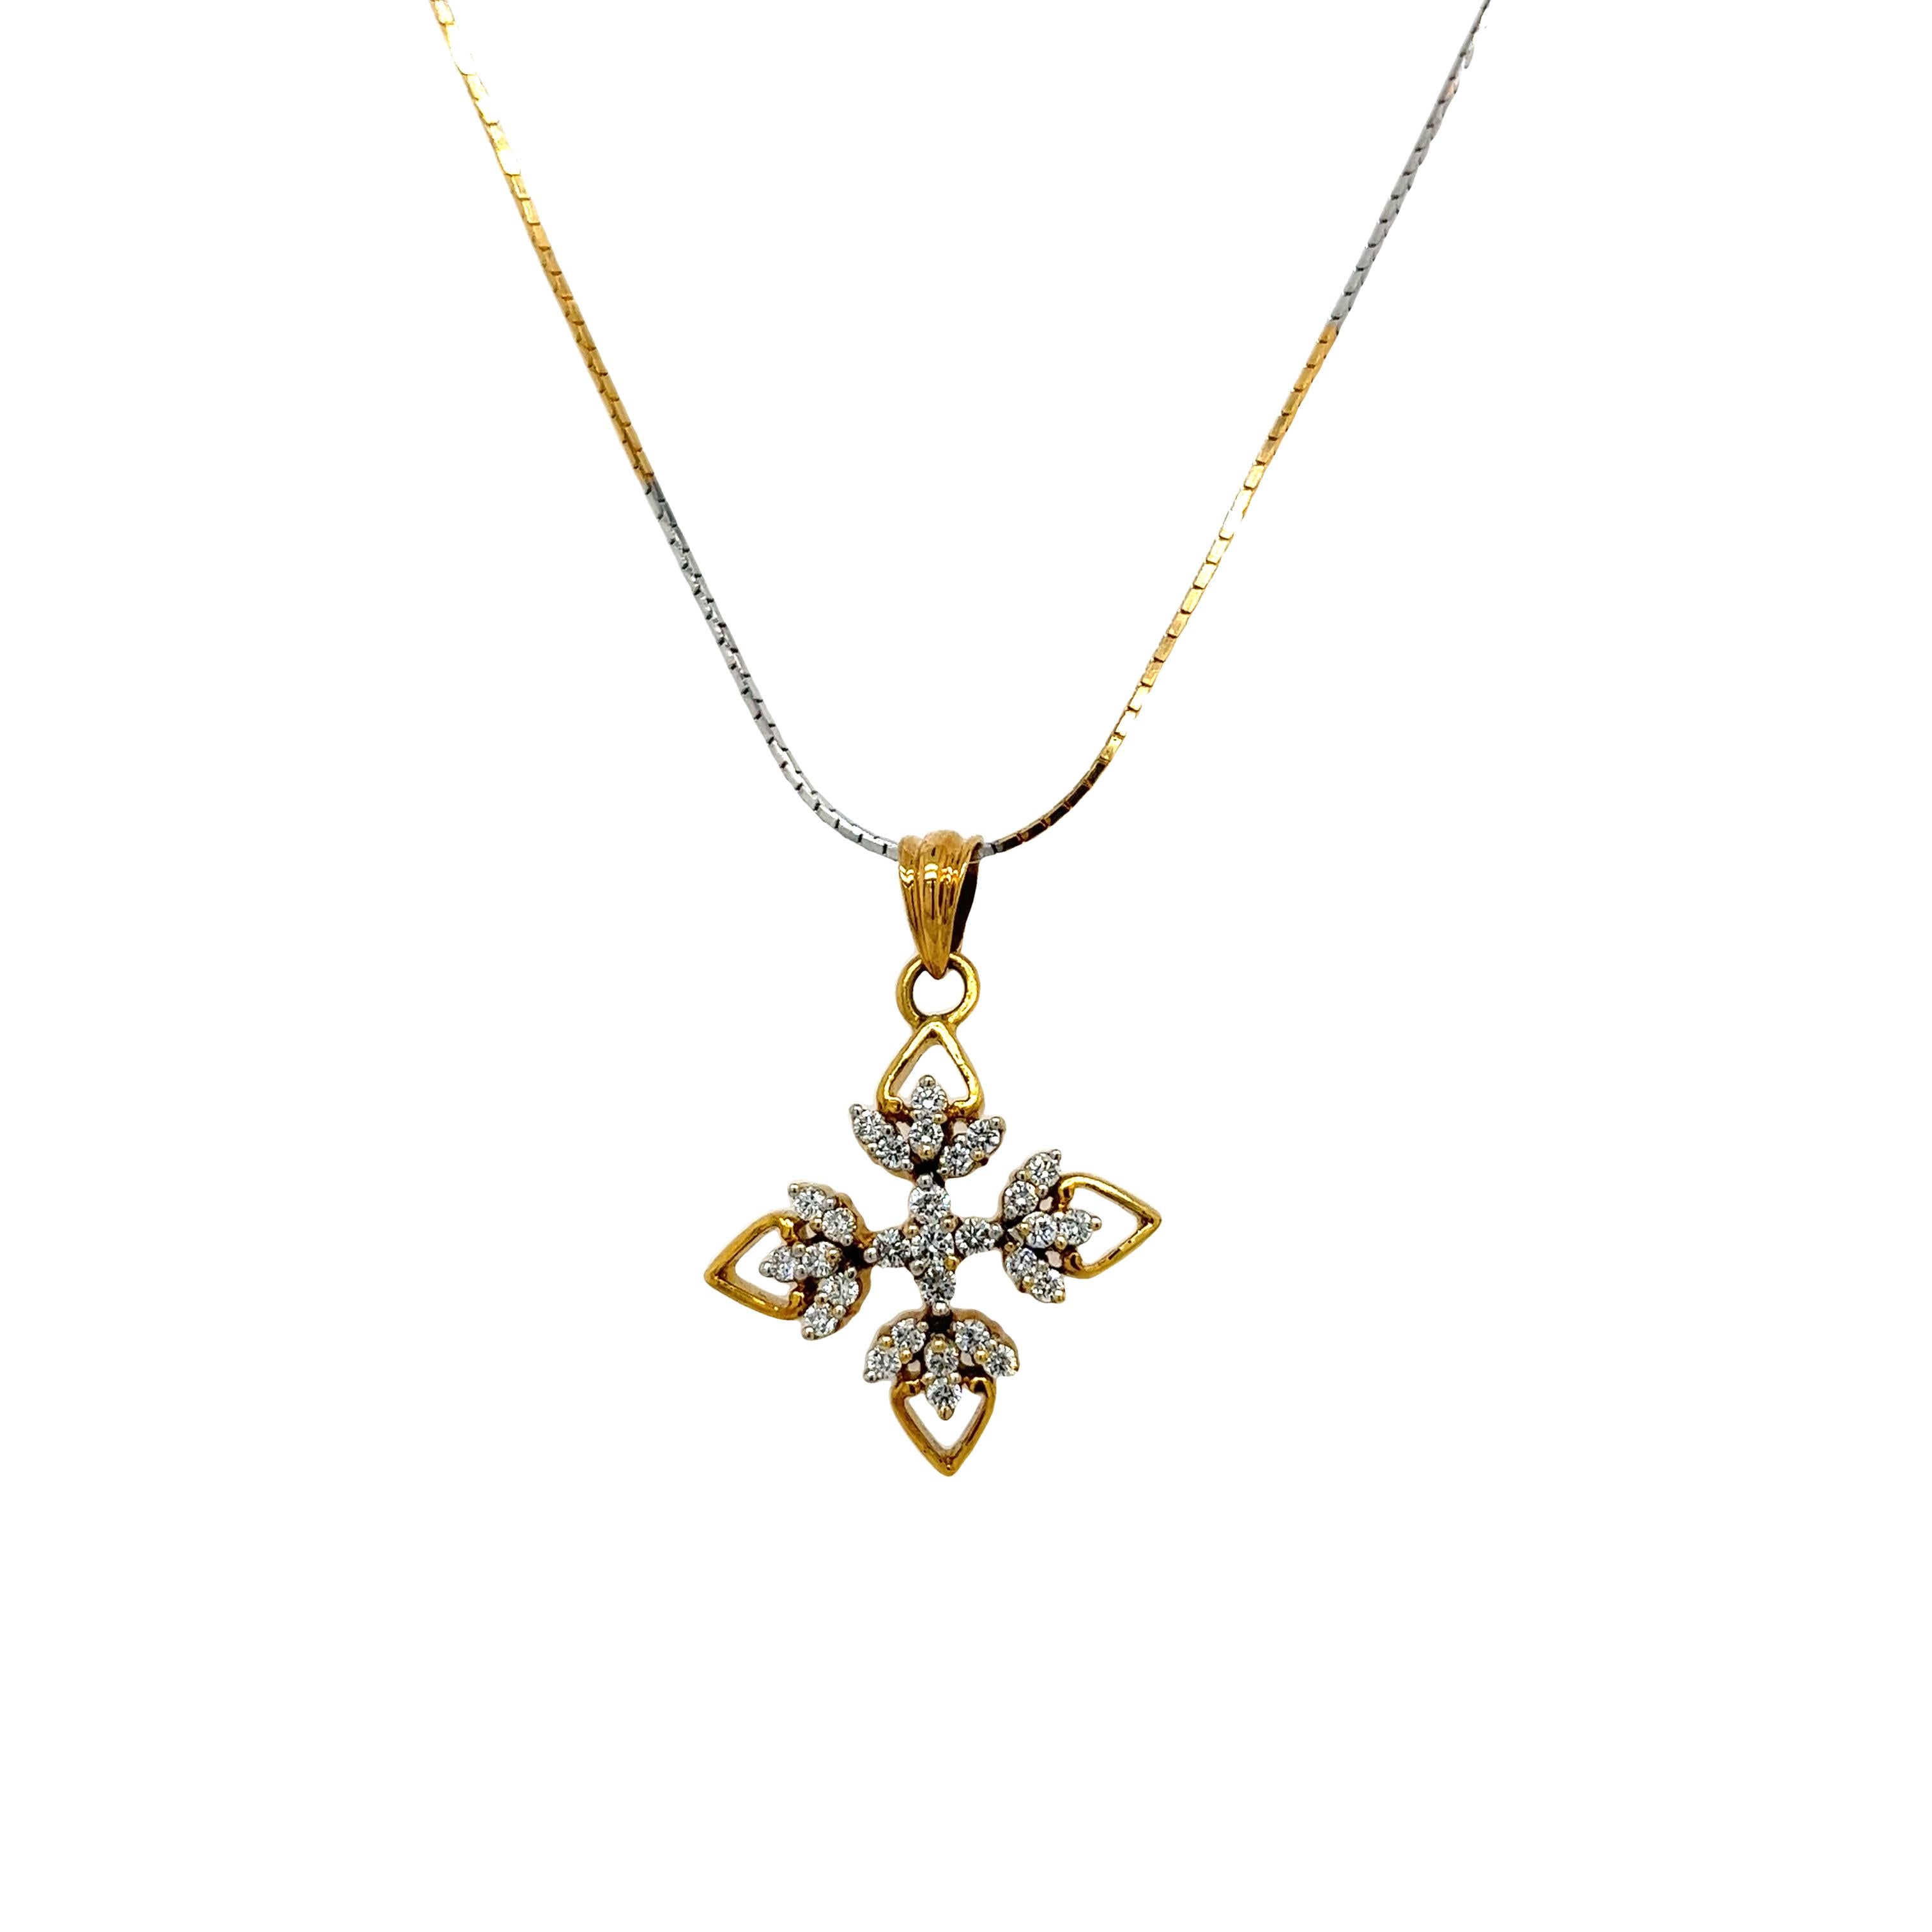 This gorgeous diamond snowflake shape pendant 
is set with a 0.44ct round brilliant cut diamond in 18ct yellow & white gold, 
The pendant is suspended from an 18ct yellow & white gold chain that measures 15 inches. 
(the pendant is tested as 18ct